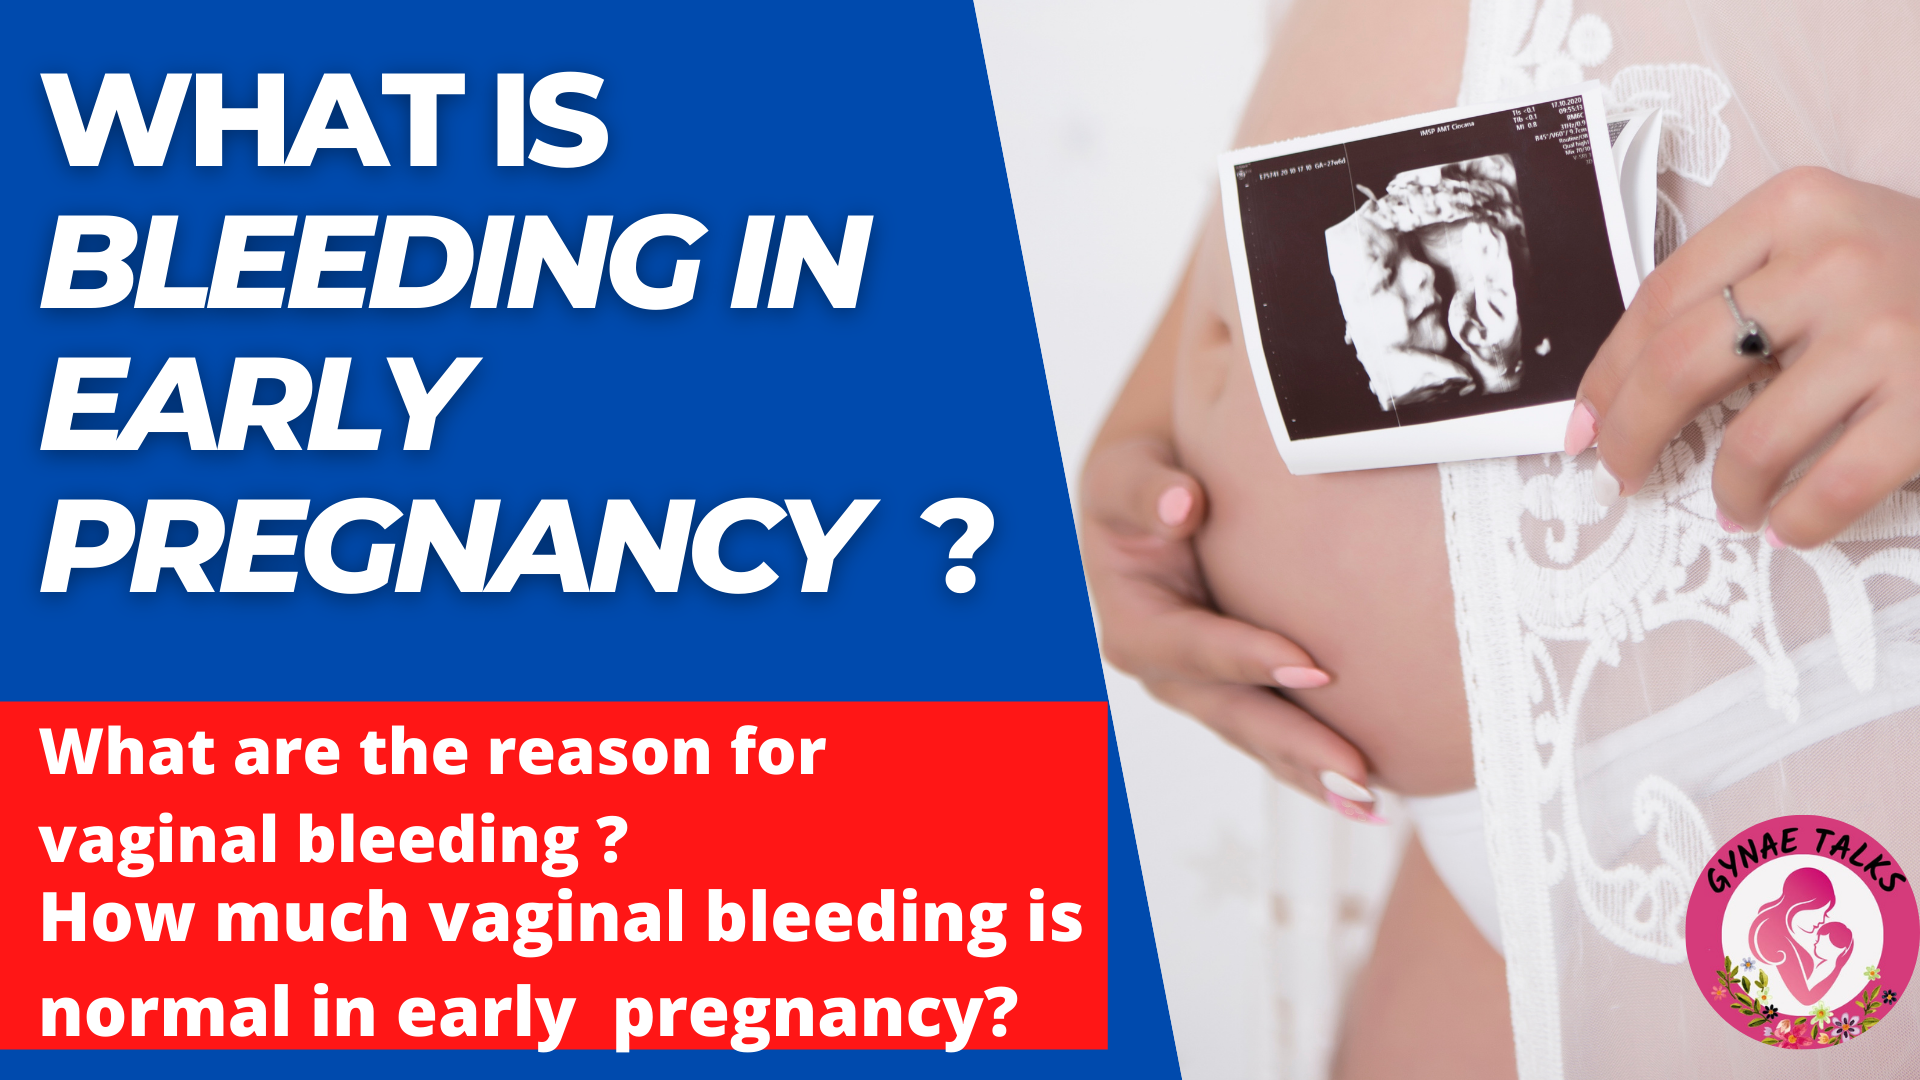 How much vaginal bleeding is normal in early pregnancy?